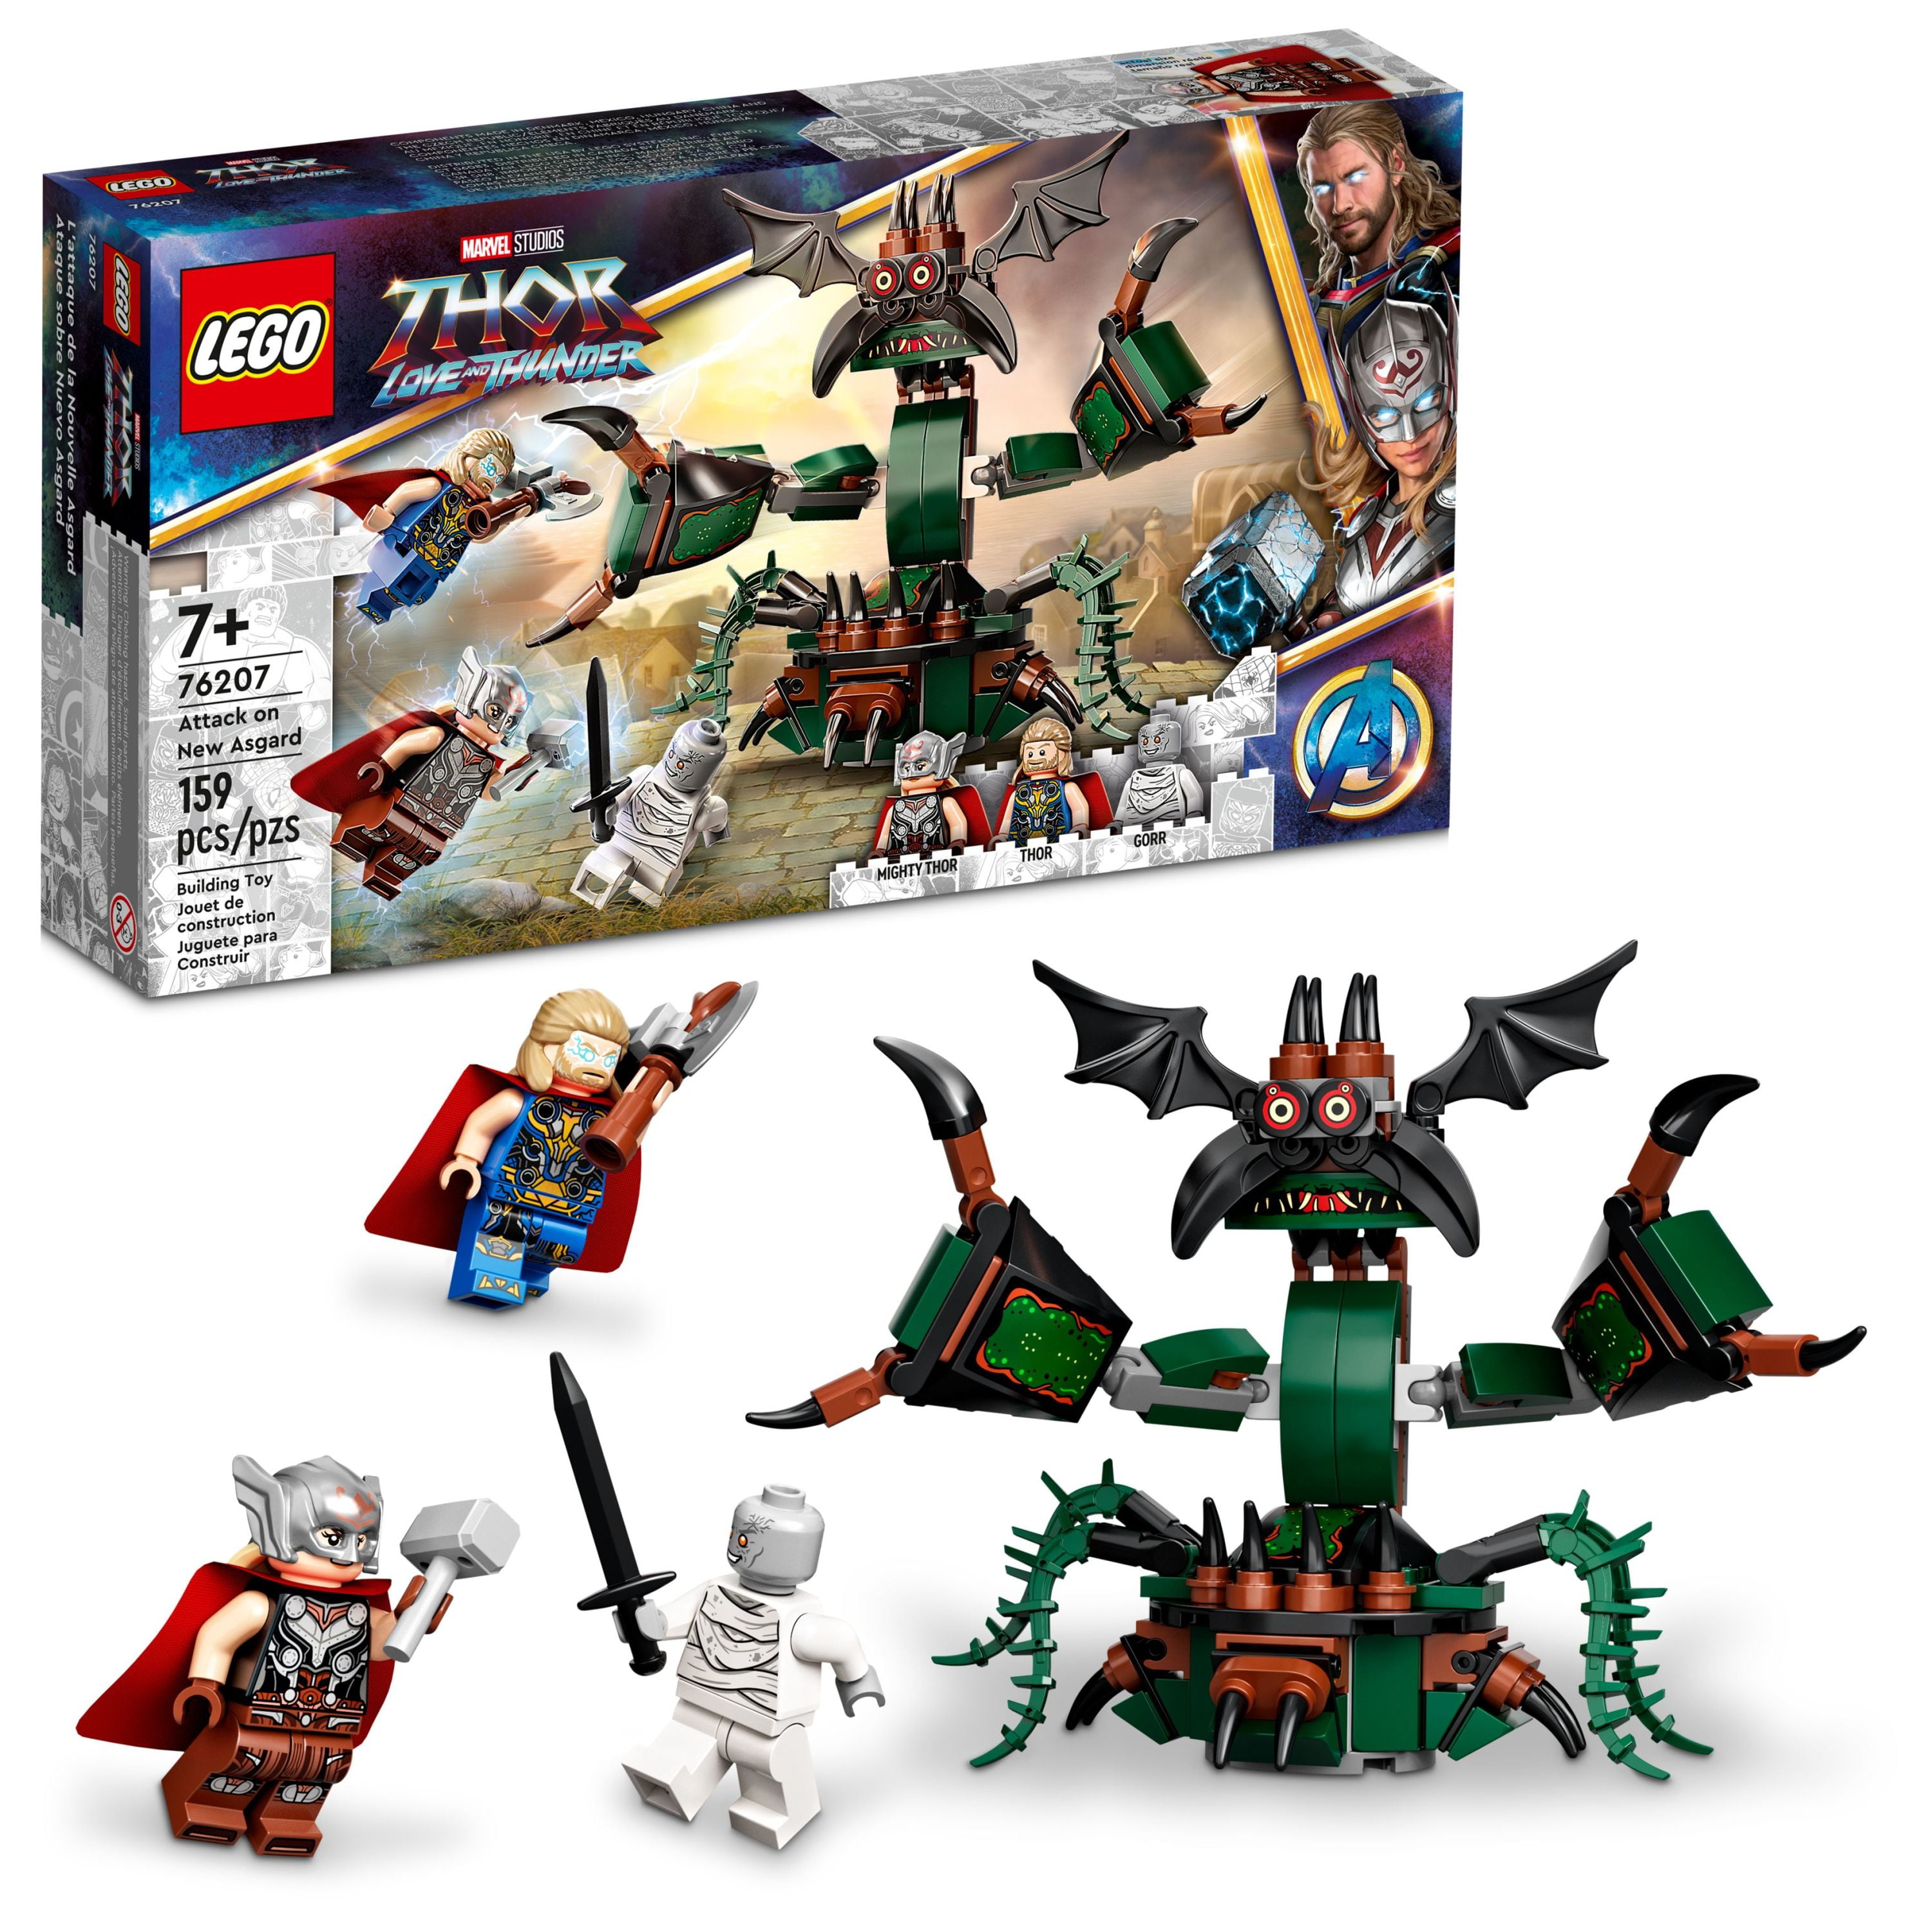 LEGO Marvel Attack on New Asgard, Thor Buildable Toy 76207 with Hammer, Stormbreaker and Monster Figure, Love and Thunder Movie Set